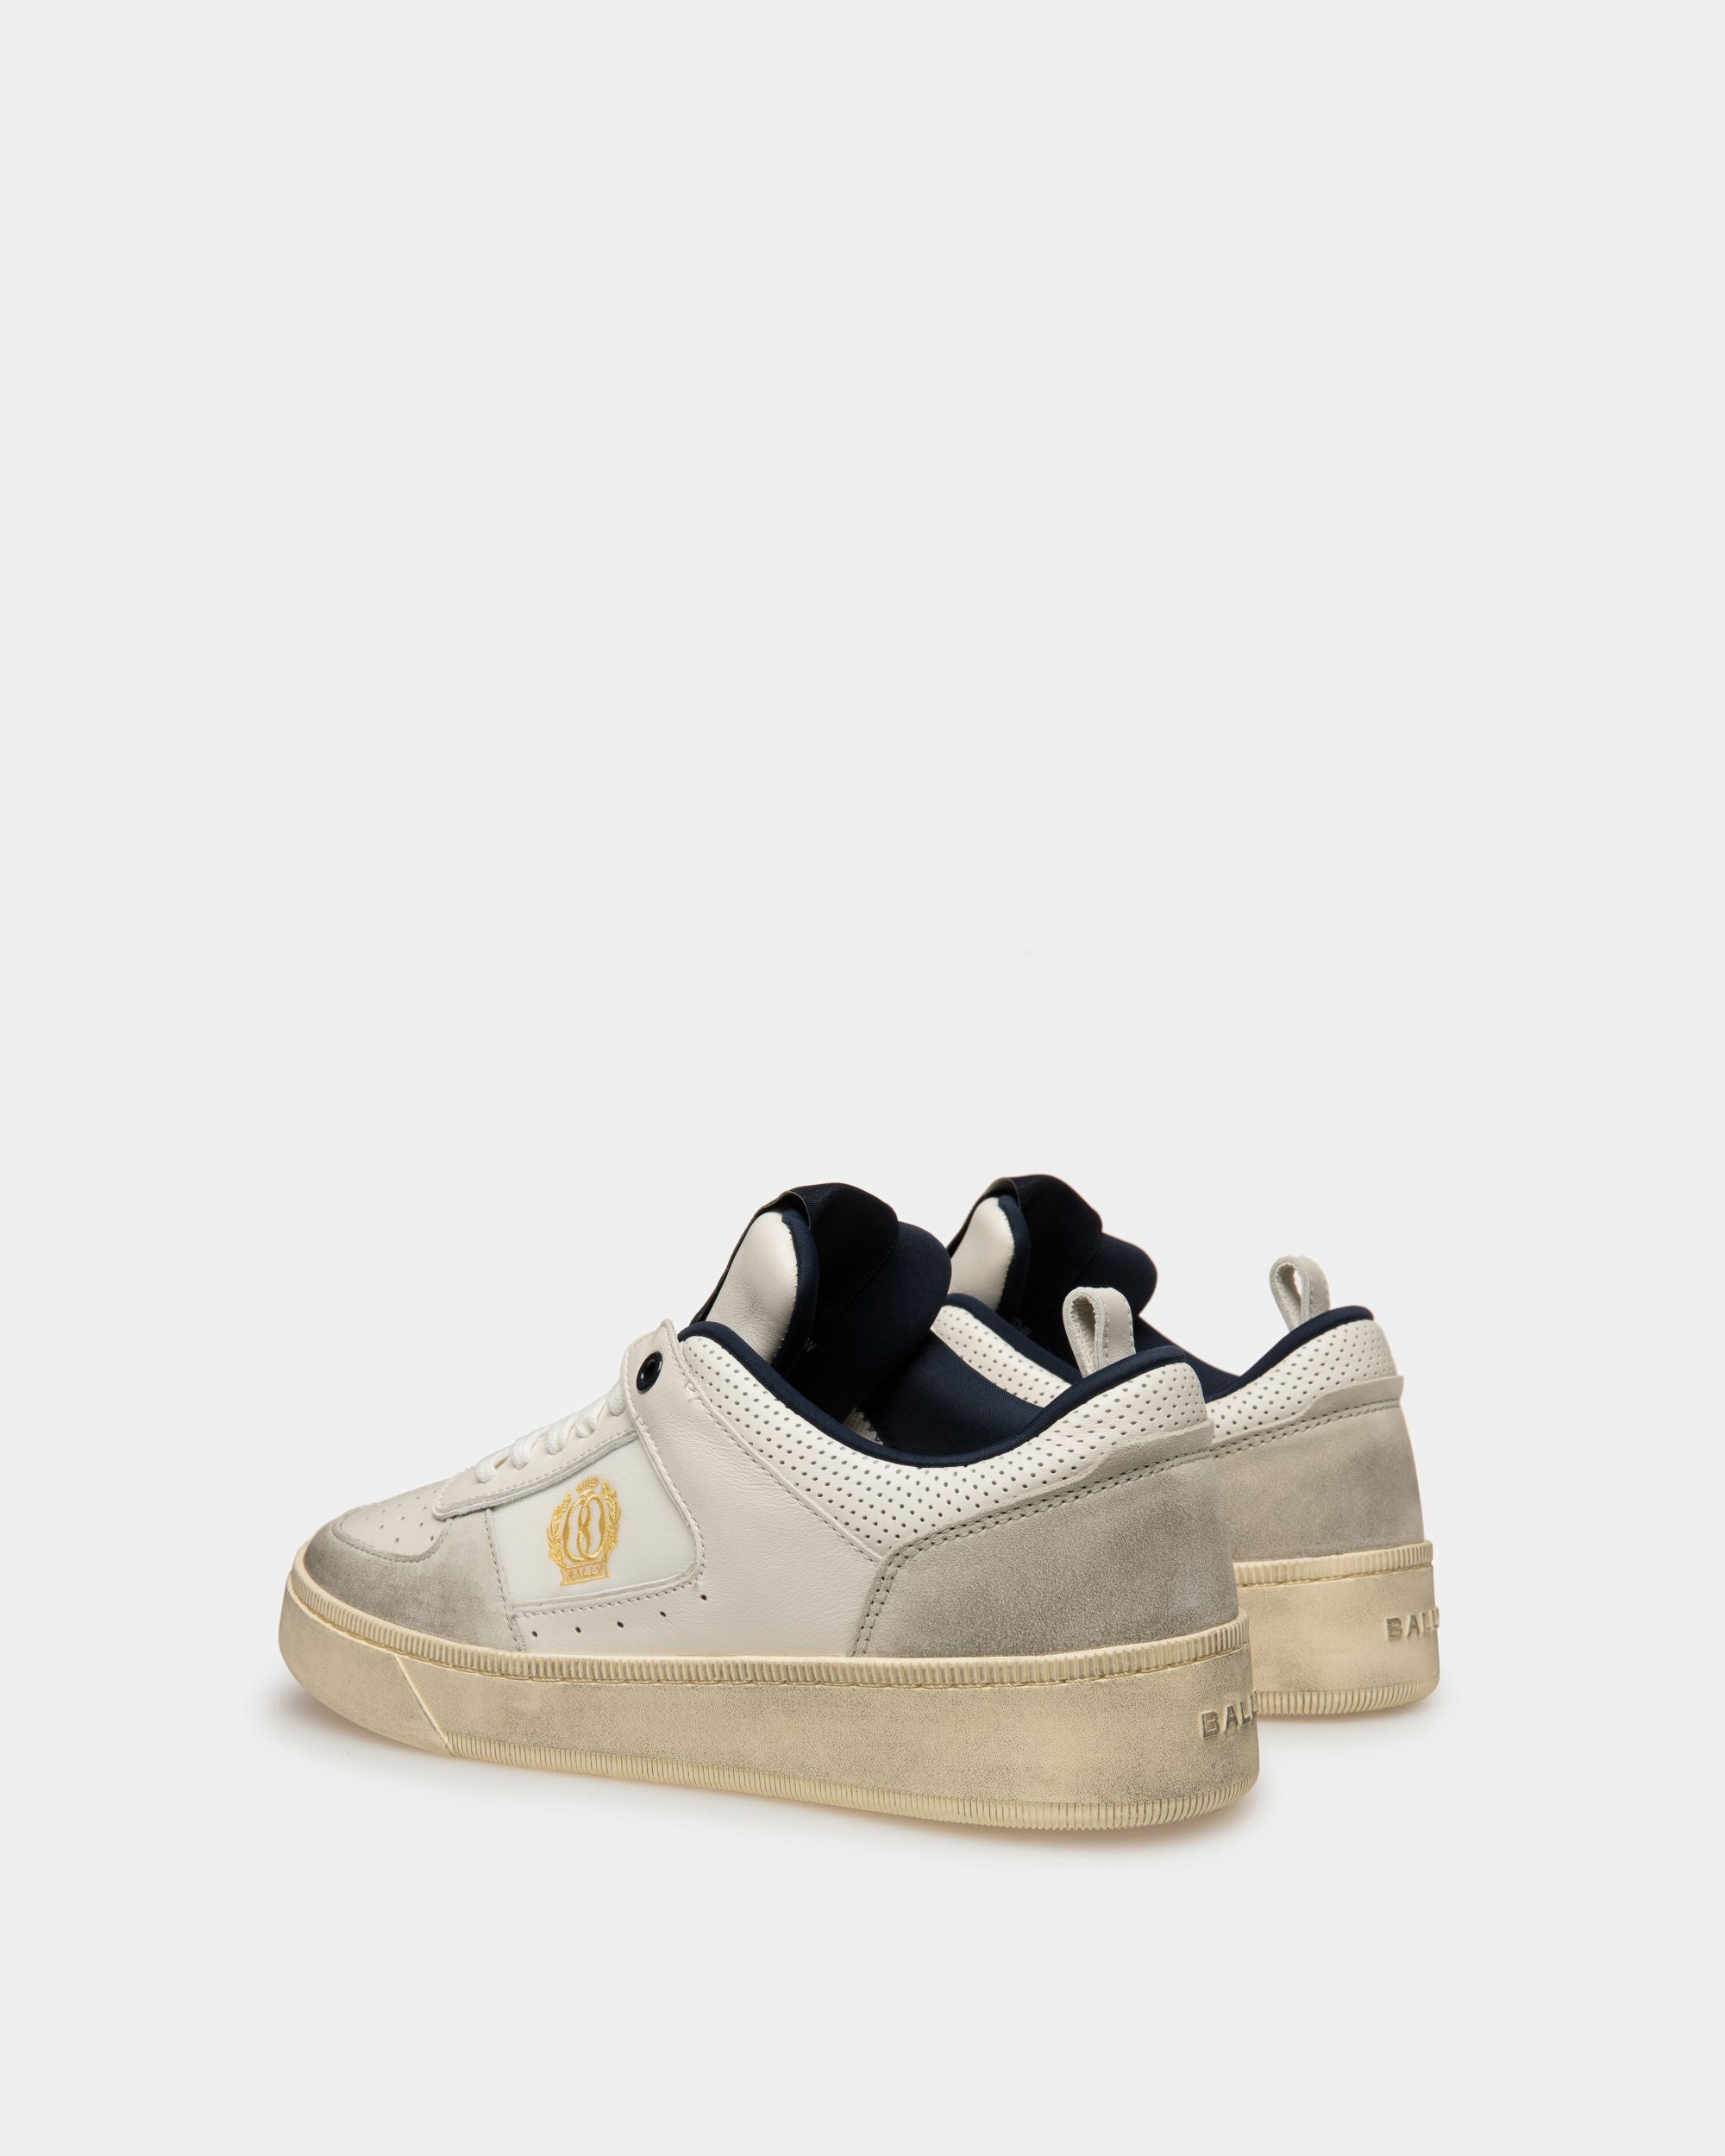 Riweira | Women's Sneakers | Dusty White And Midnight Leather | Bally | Still Life 3/4 Back